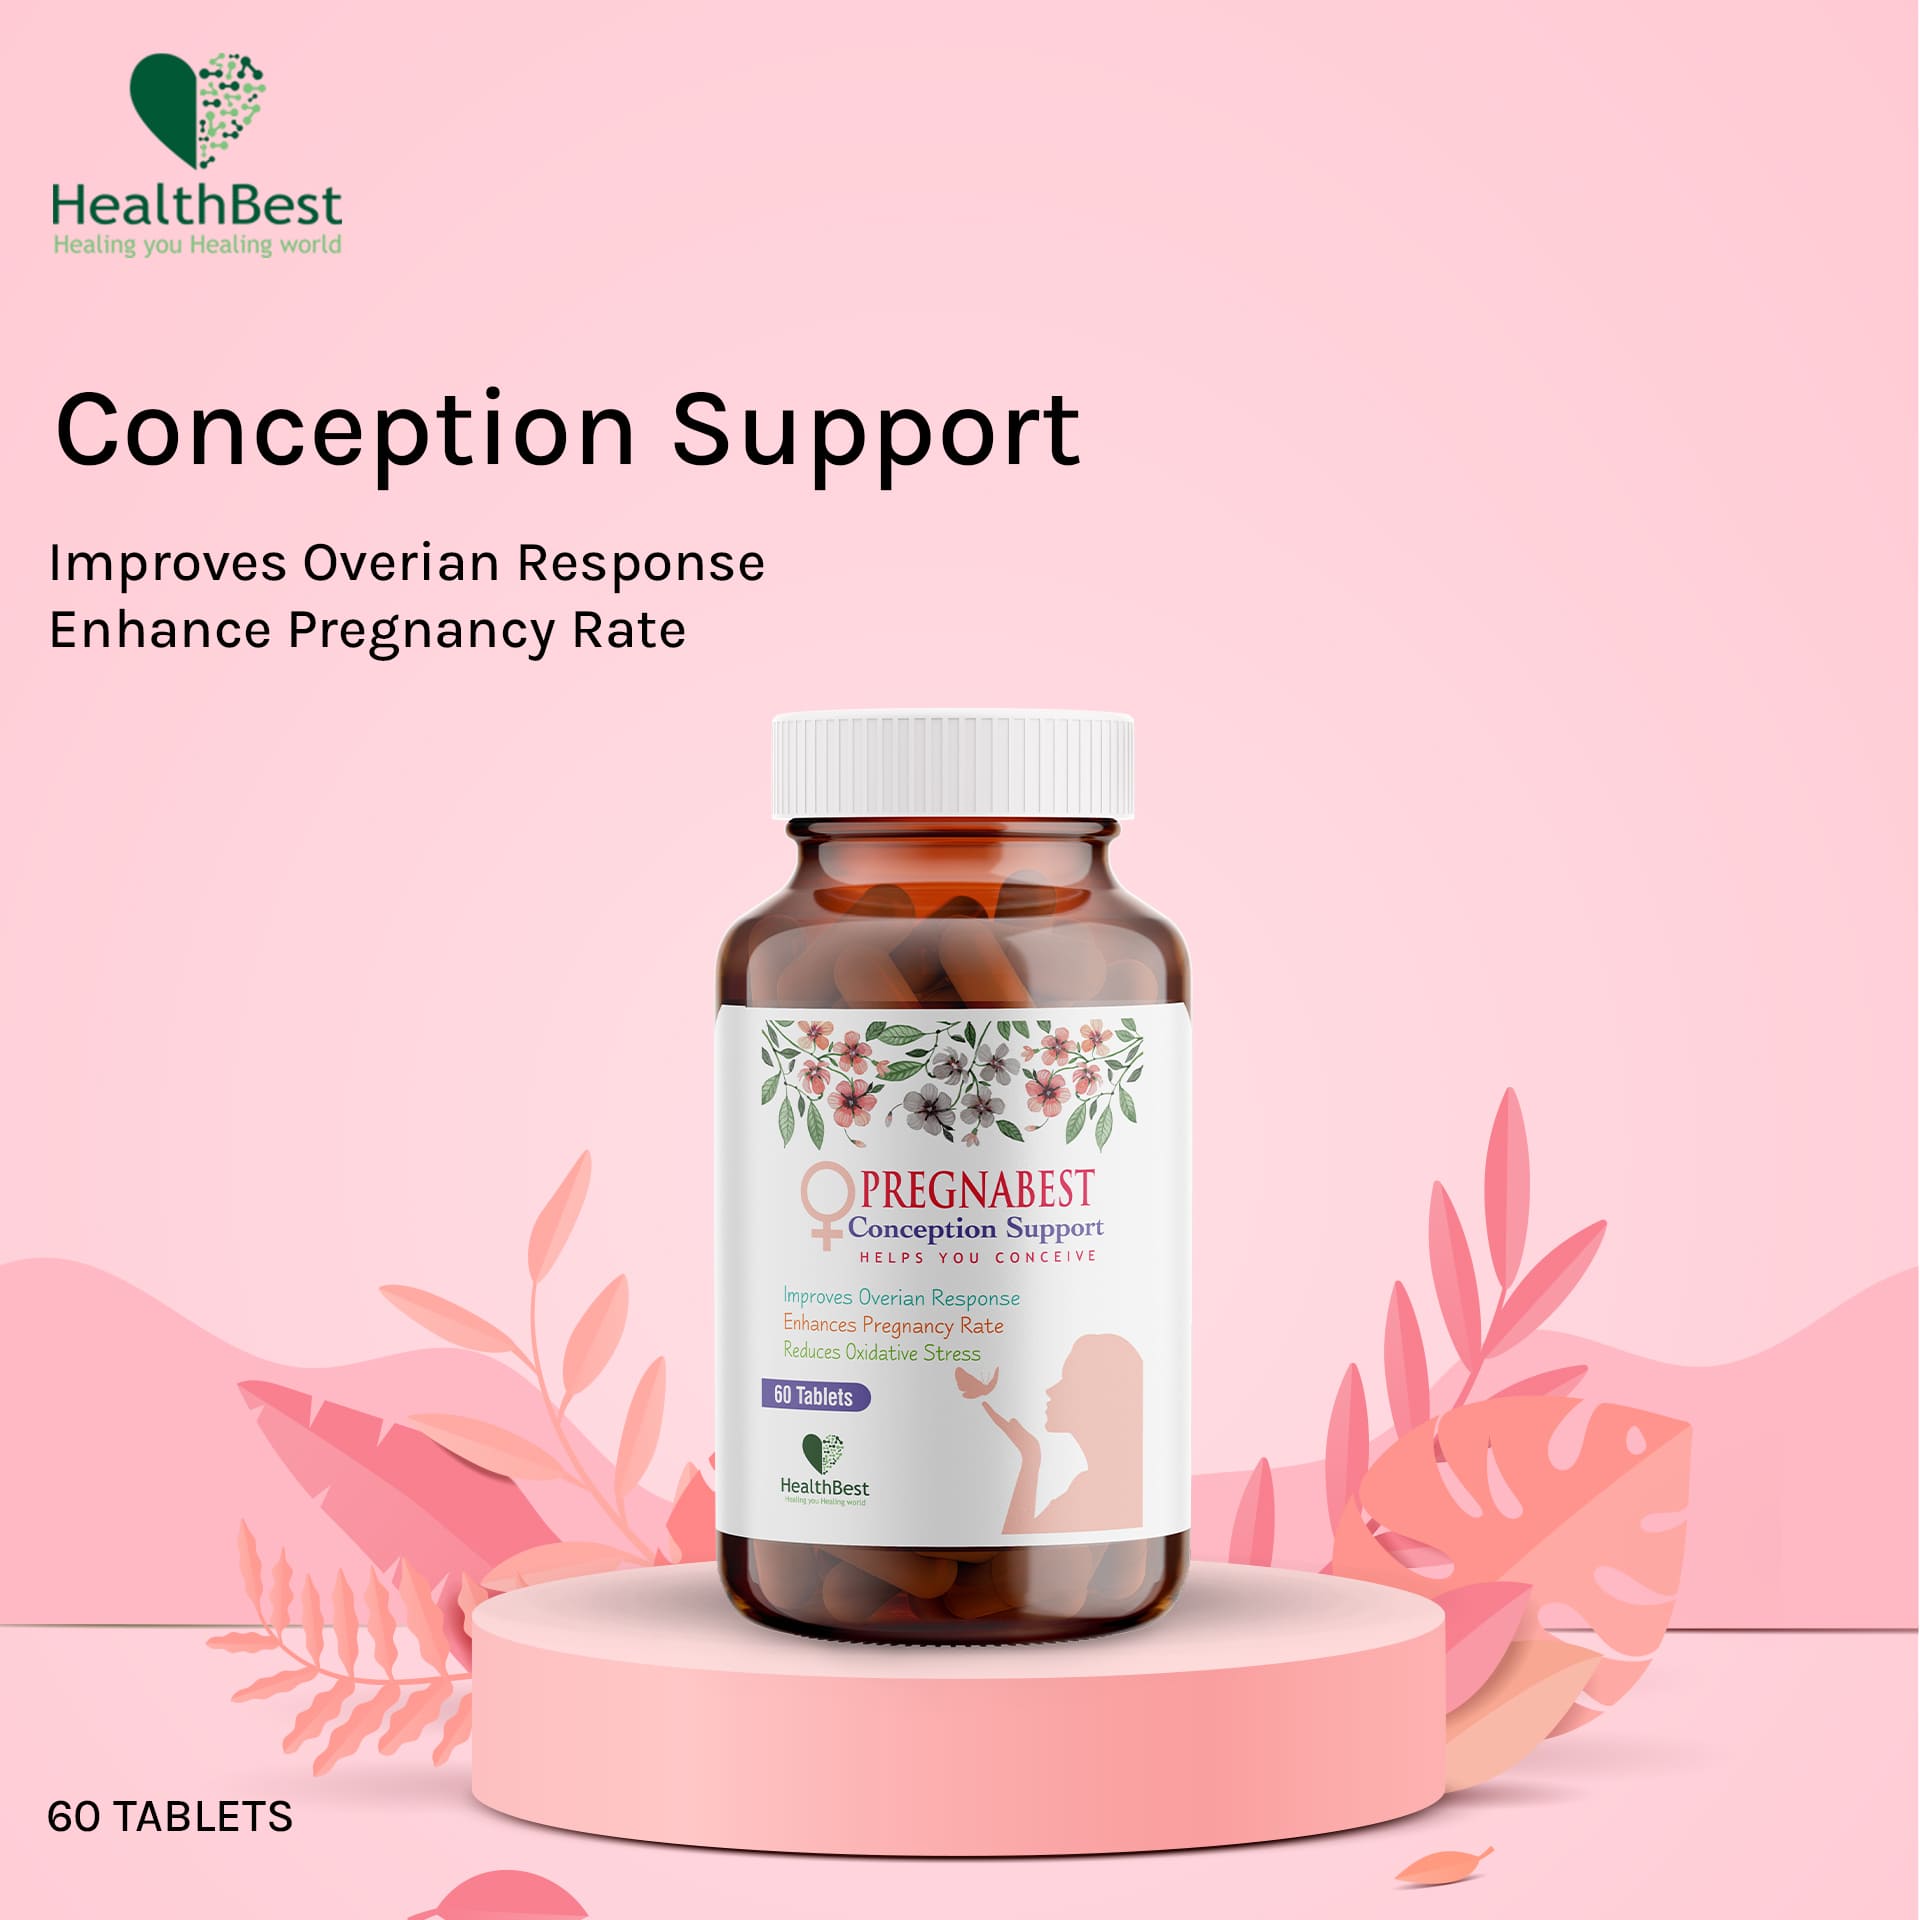 Conception Support Capsules for Women